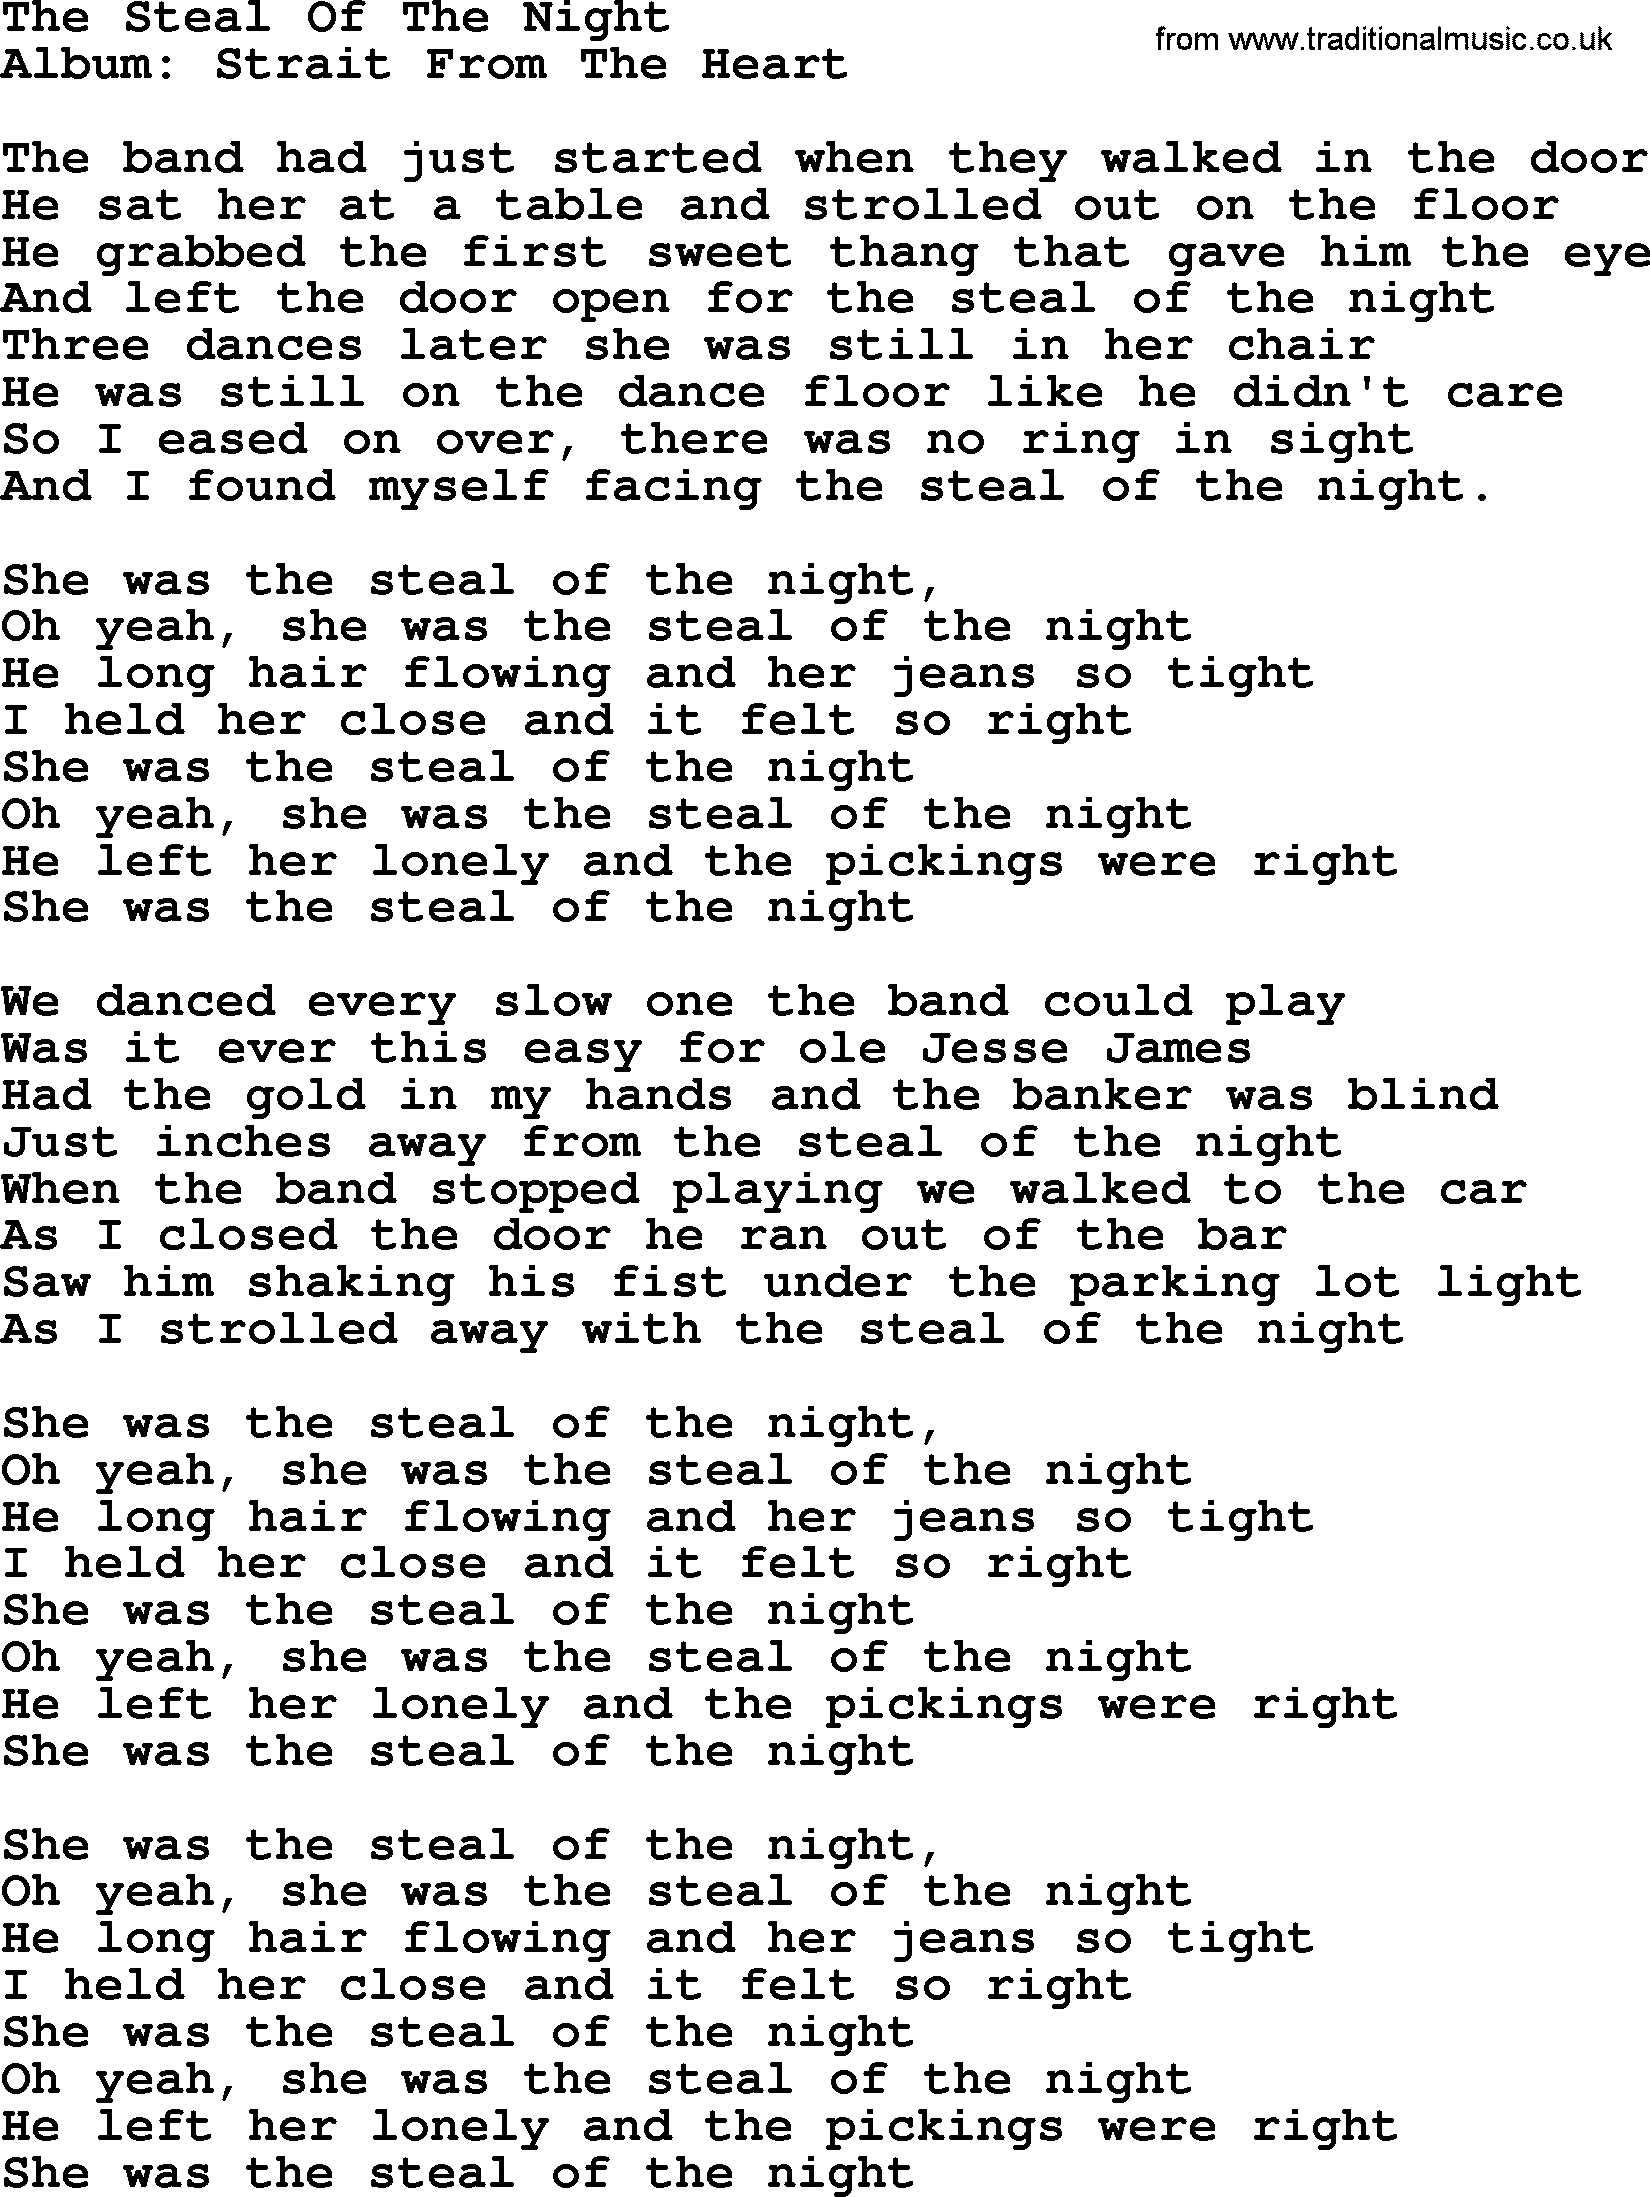 George Strait song: The Steal Of The Night, lyrics